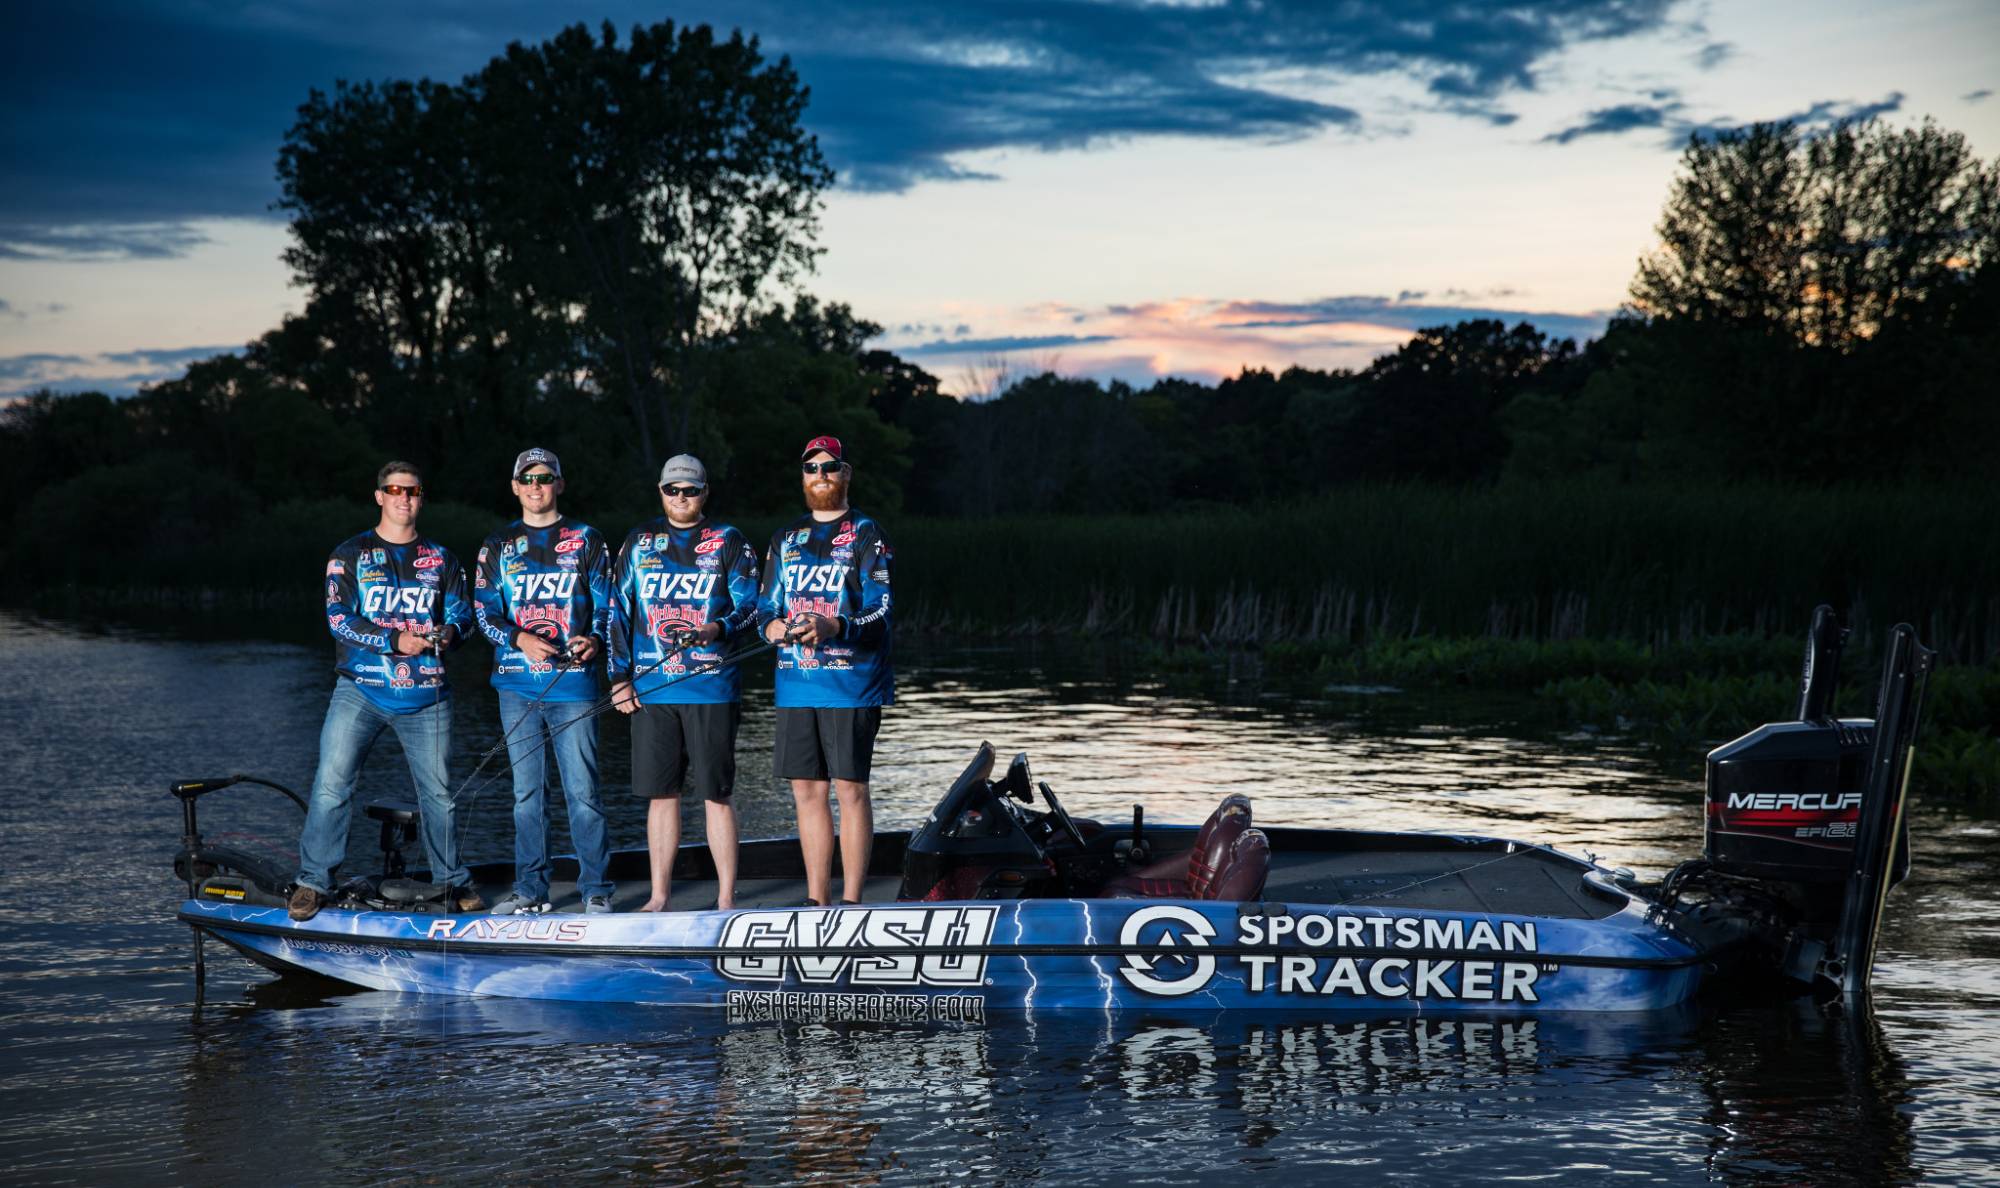 Bass fishing team picture